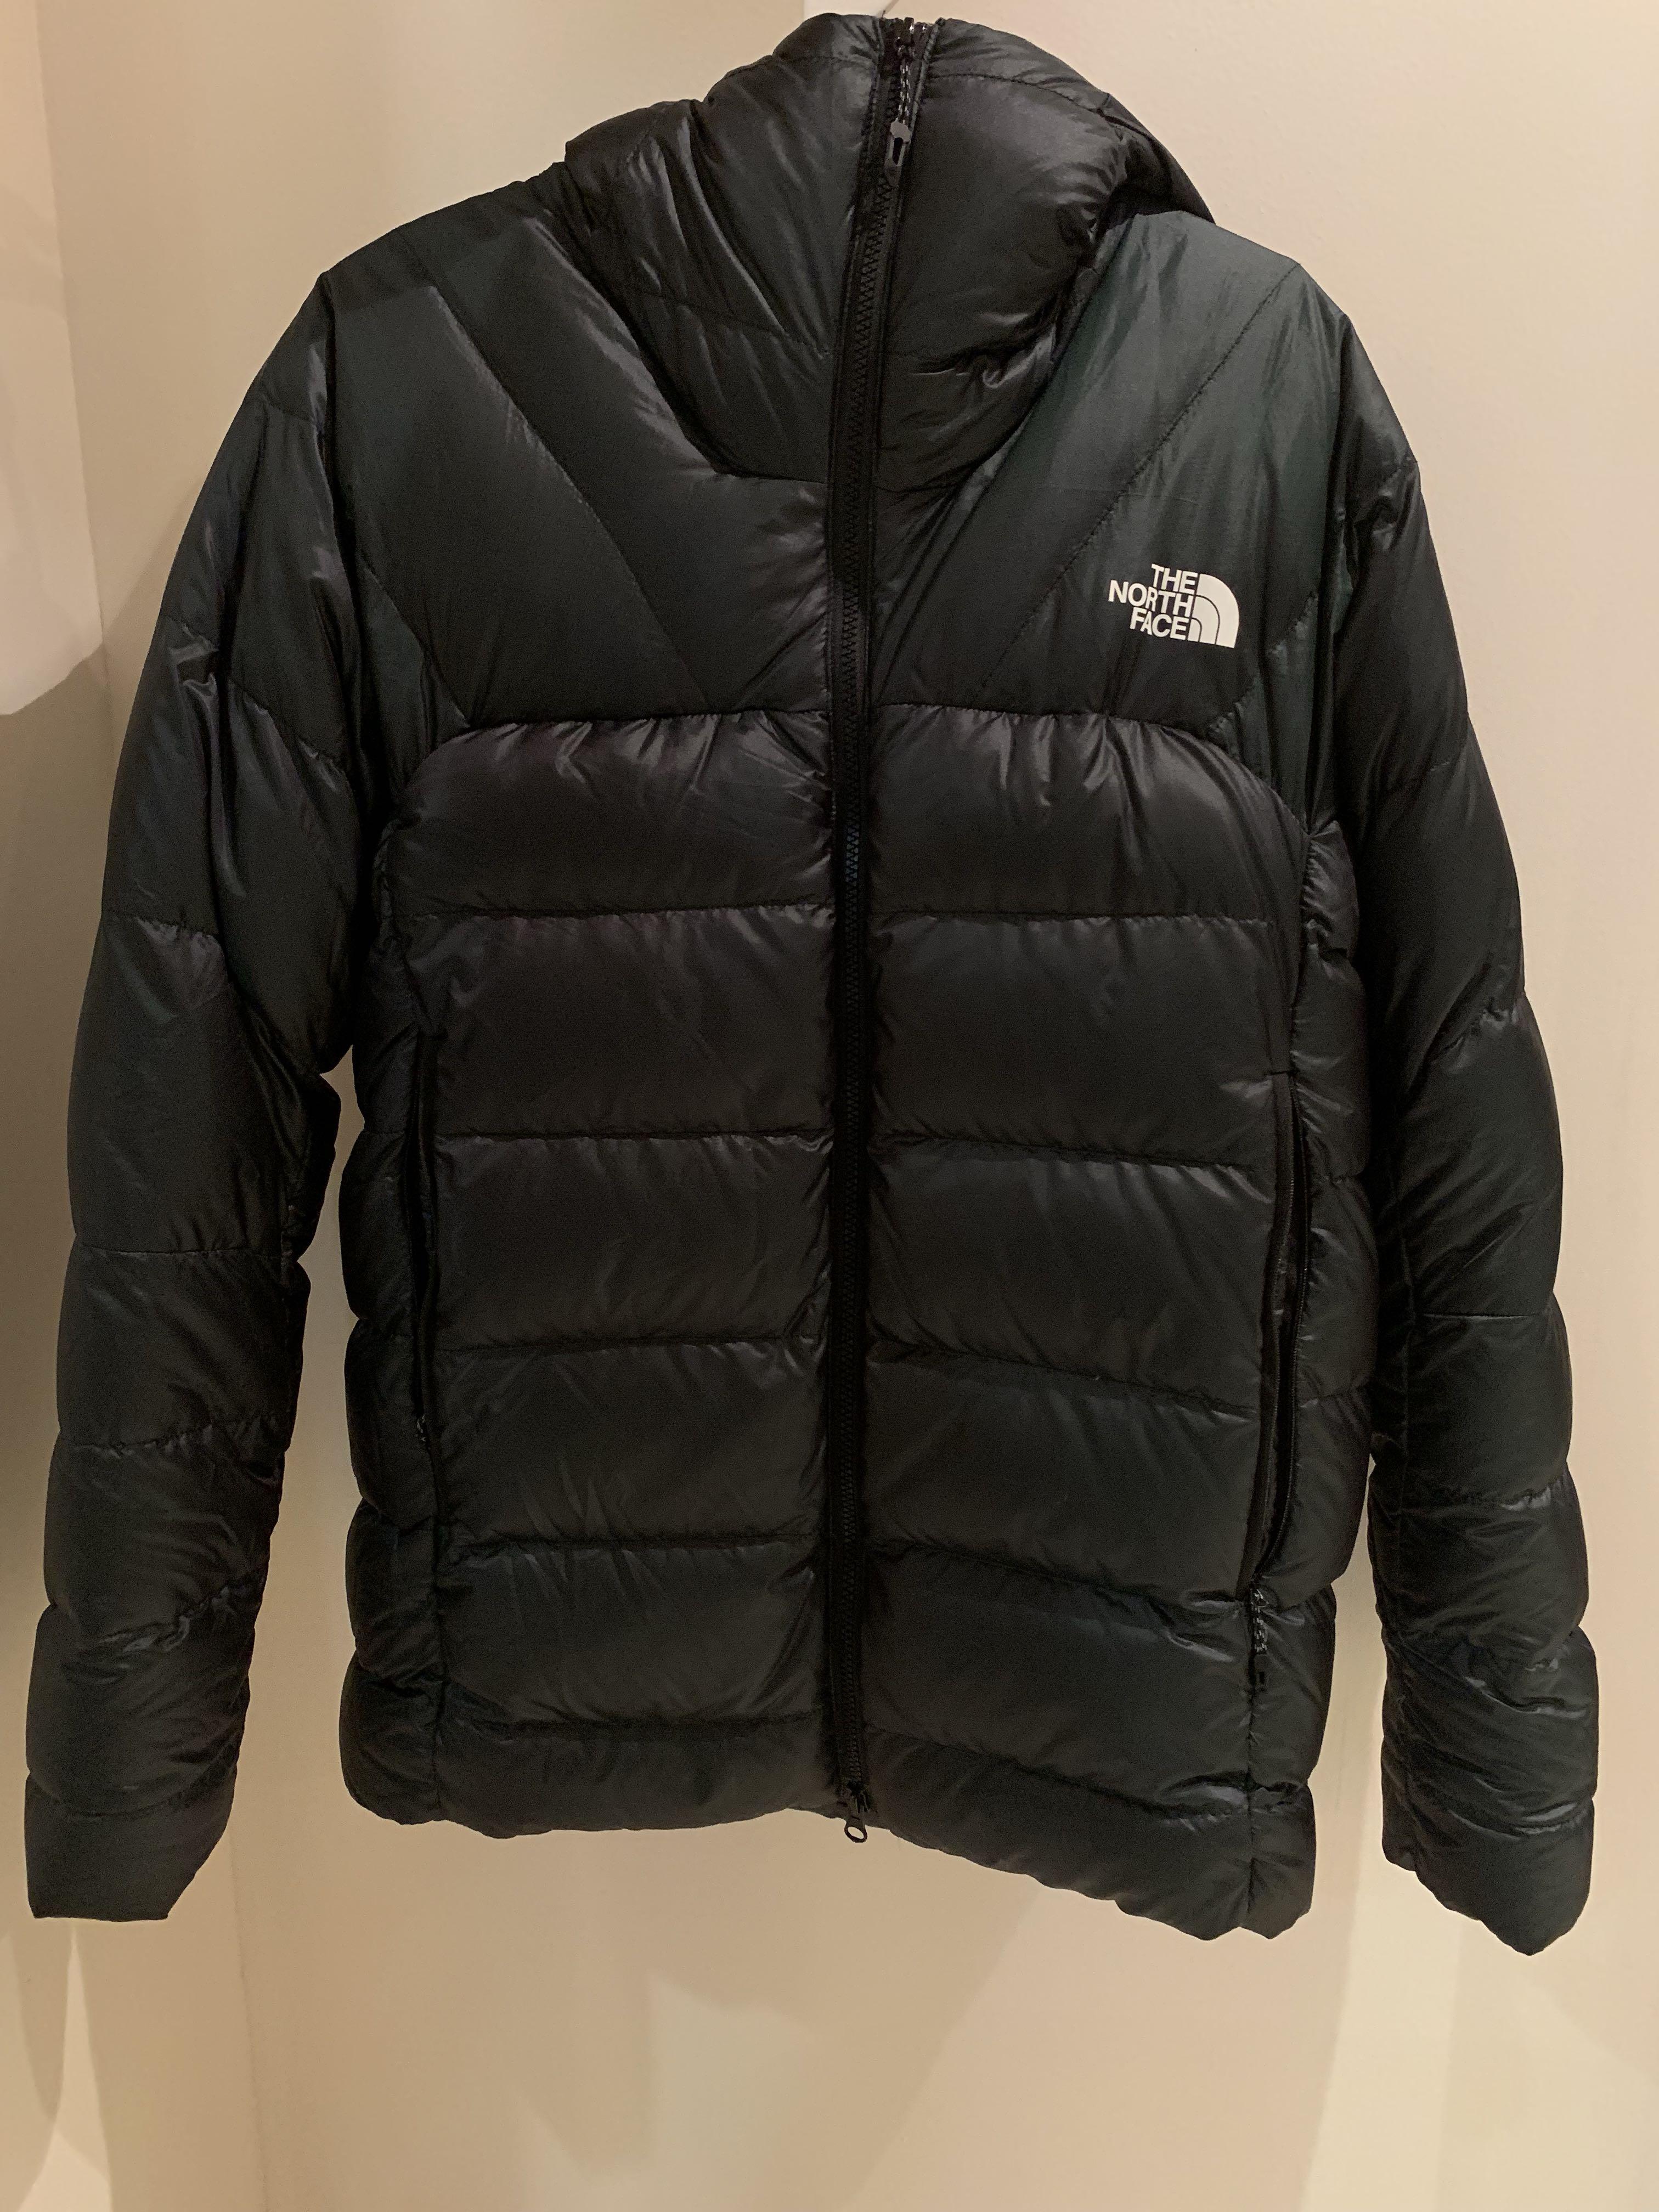 north face immaculator parka mens